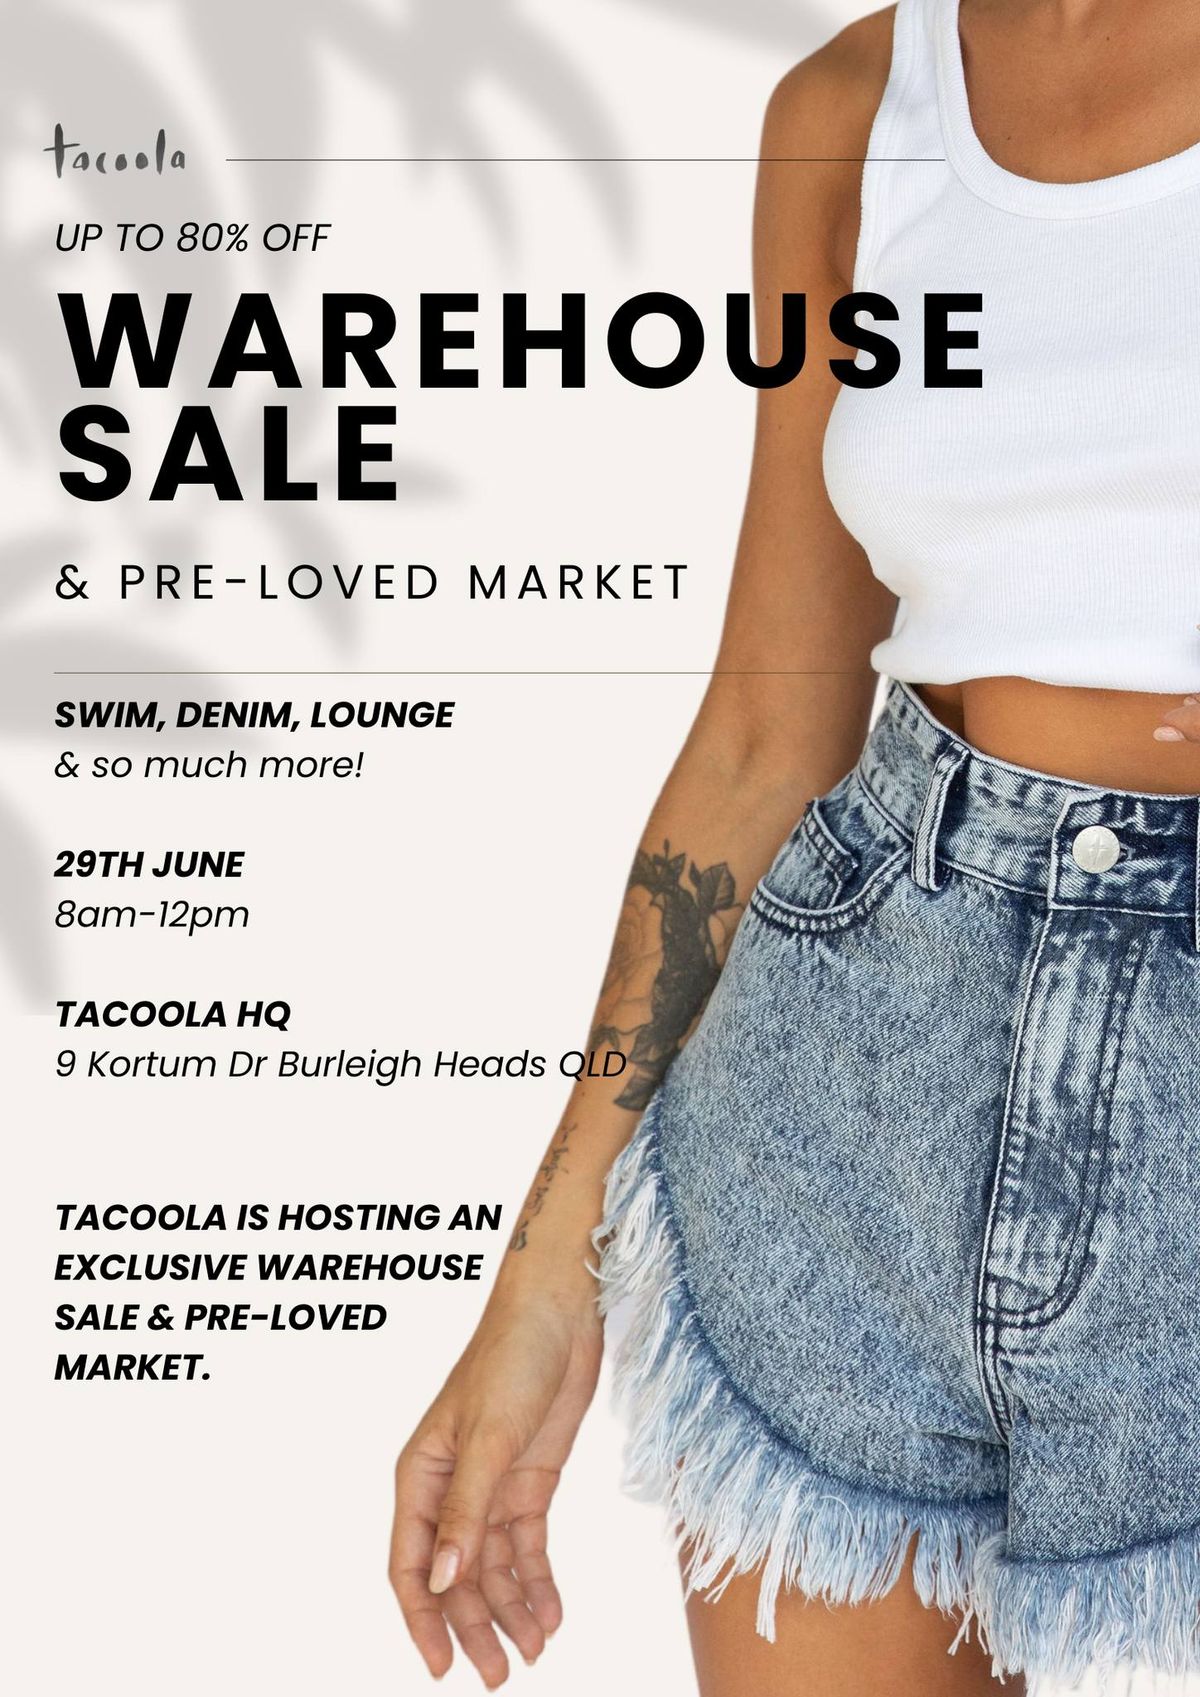 The Tacoola Warehouse Sale & Pre-Loved Market